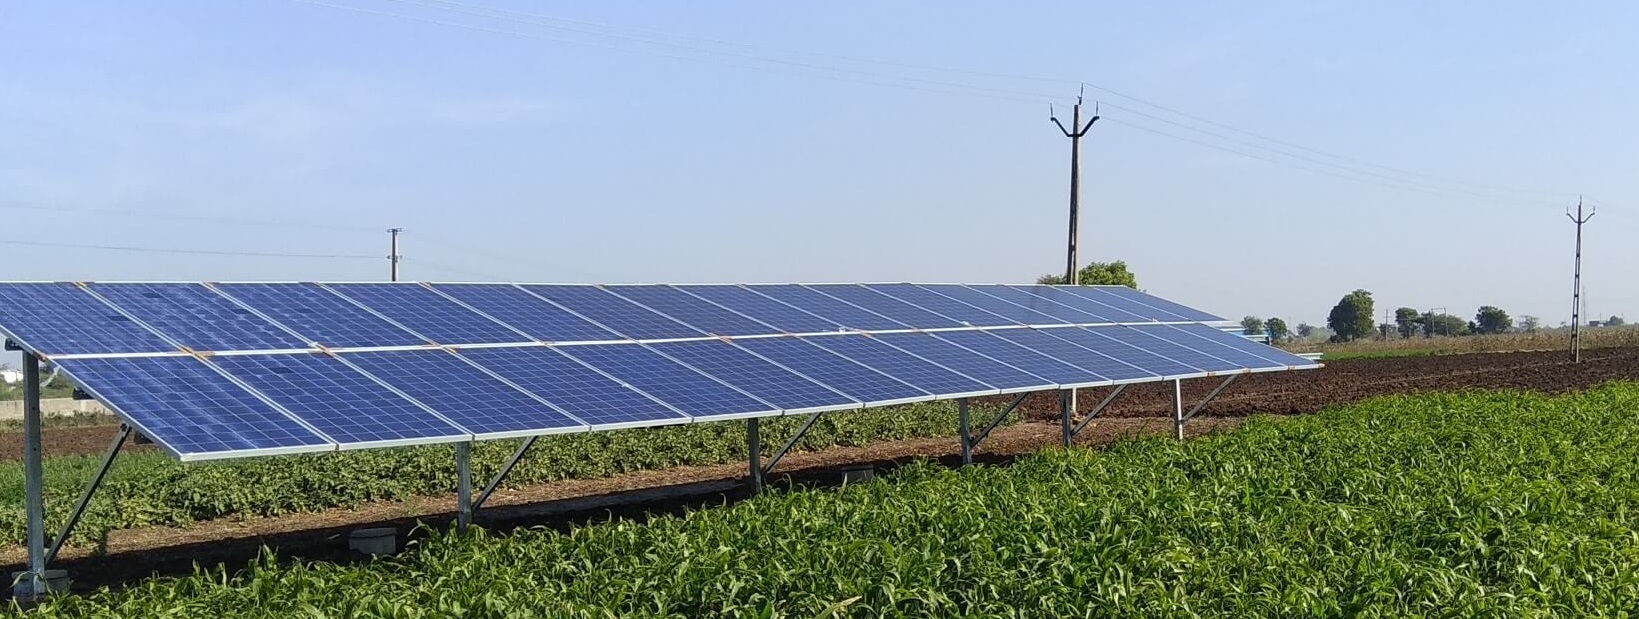 State Solar Water Pumping System